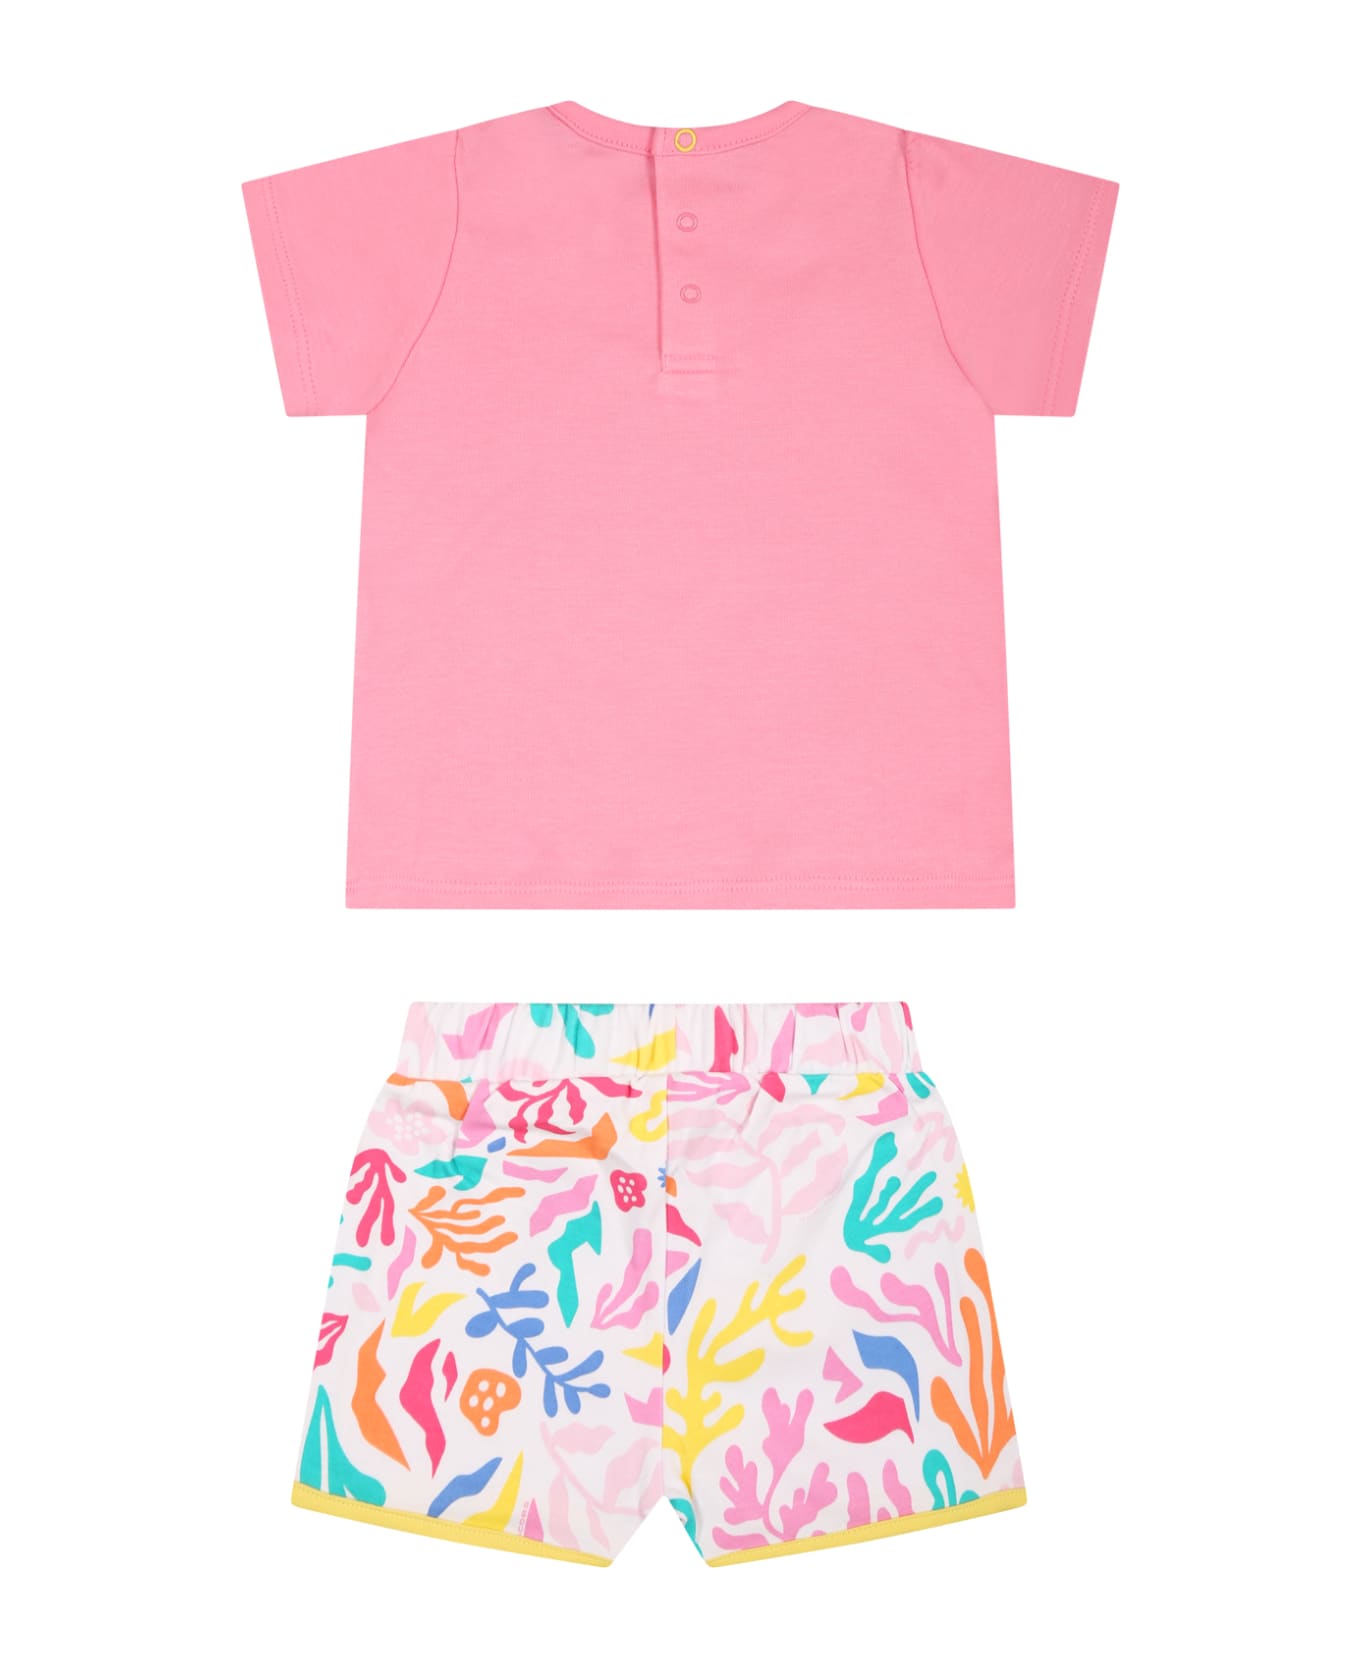 Marc Jacobs Multicolor Outfit For Baby Girl With Print And Logo - Multicolor